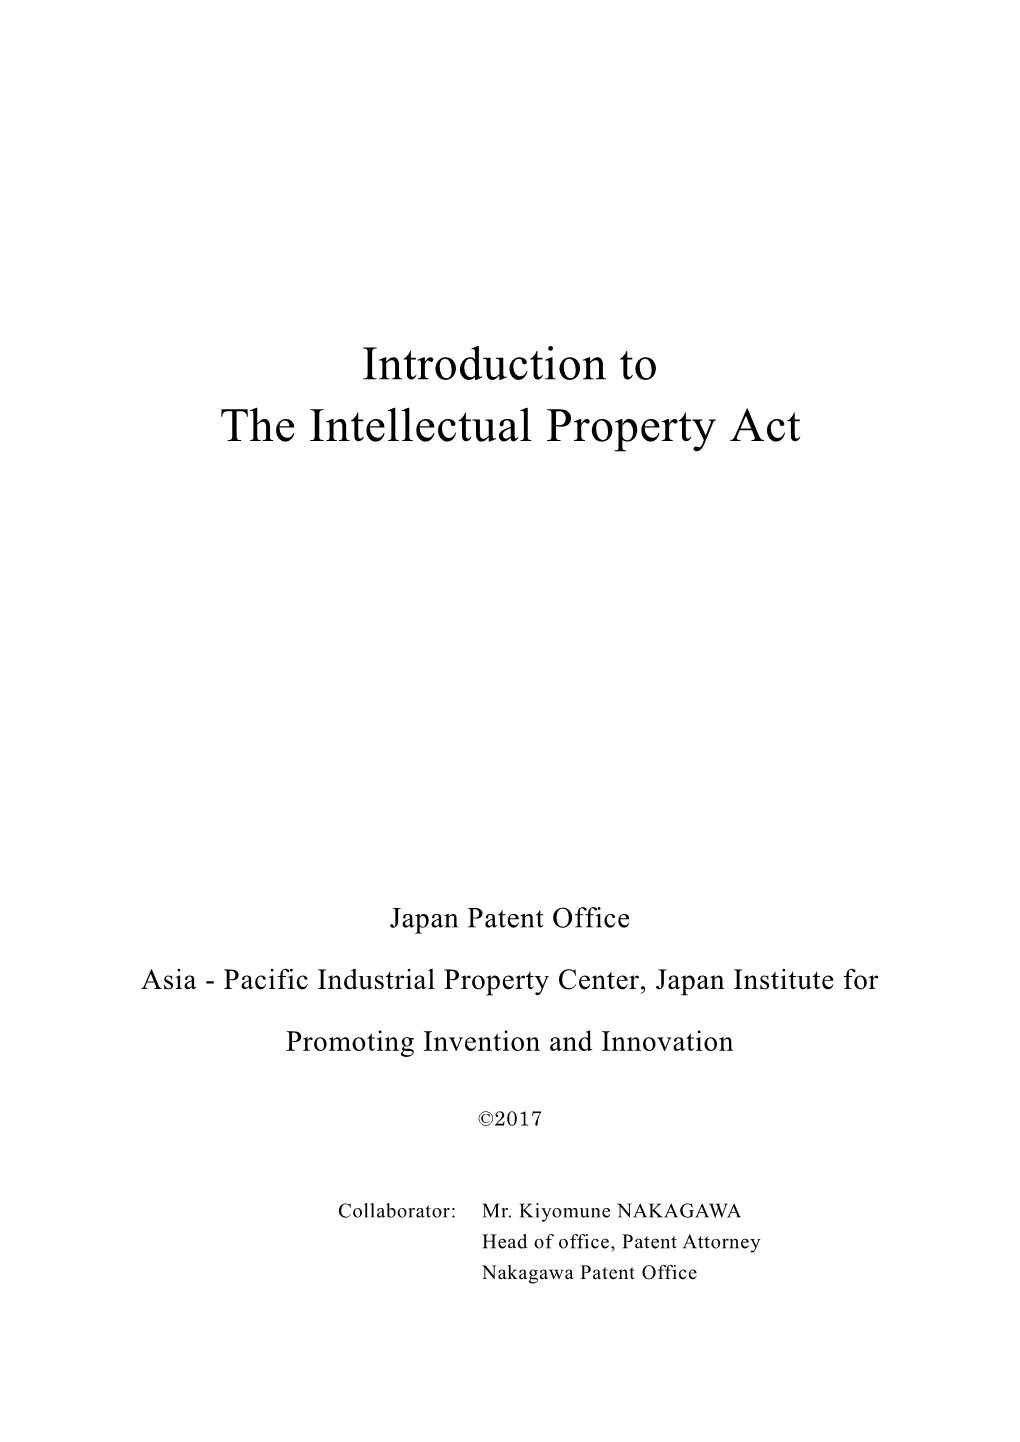 Introduction to the Intellectual Property Act